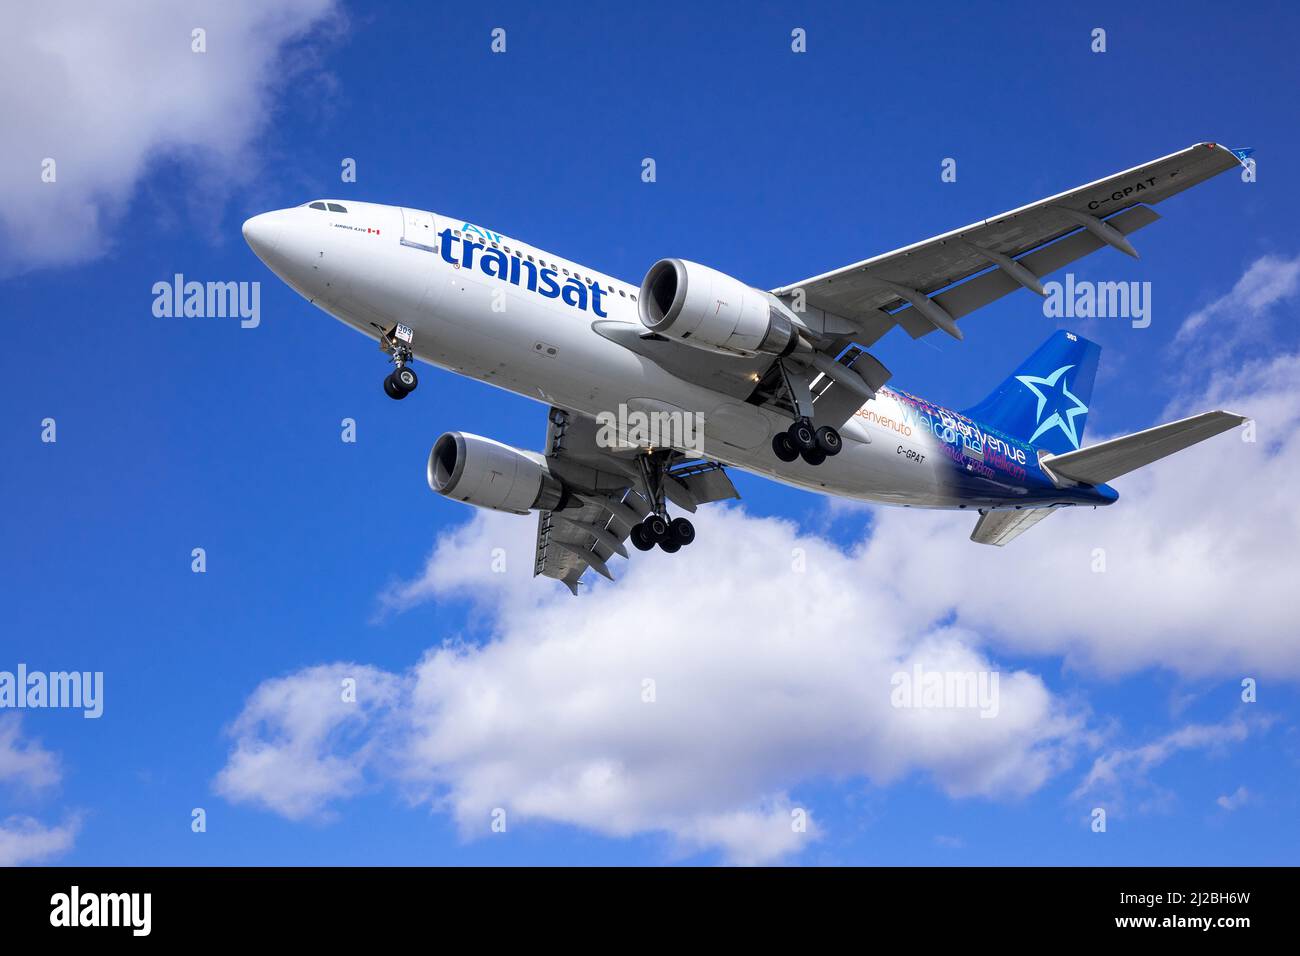 Canadian Airline Air Transat Airbus A310 Landing At Lester B. Pearson International Airport, known as Toronto Pearson International Airport Canada YYZ Stock Photo